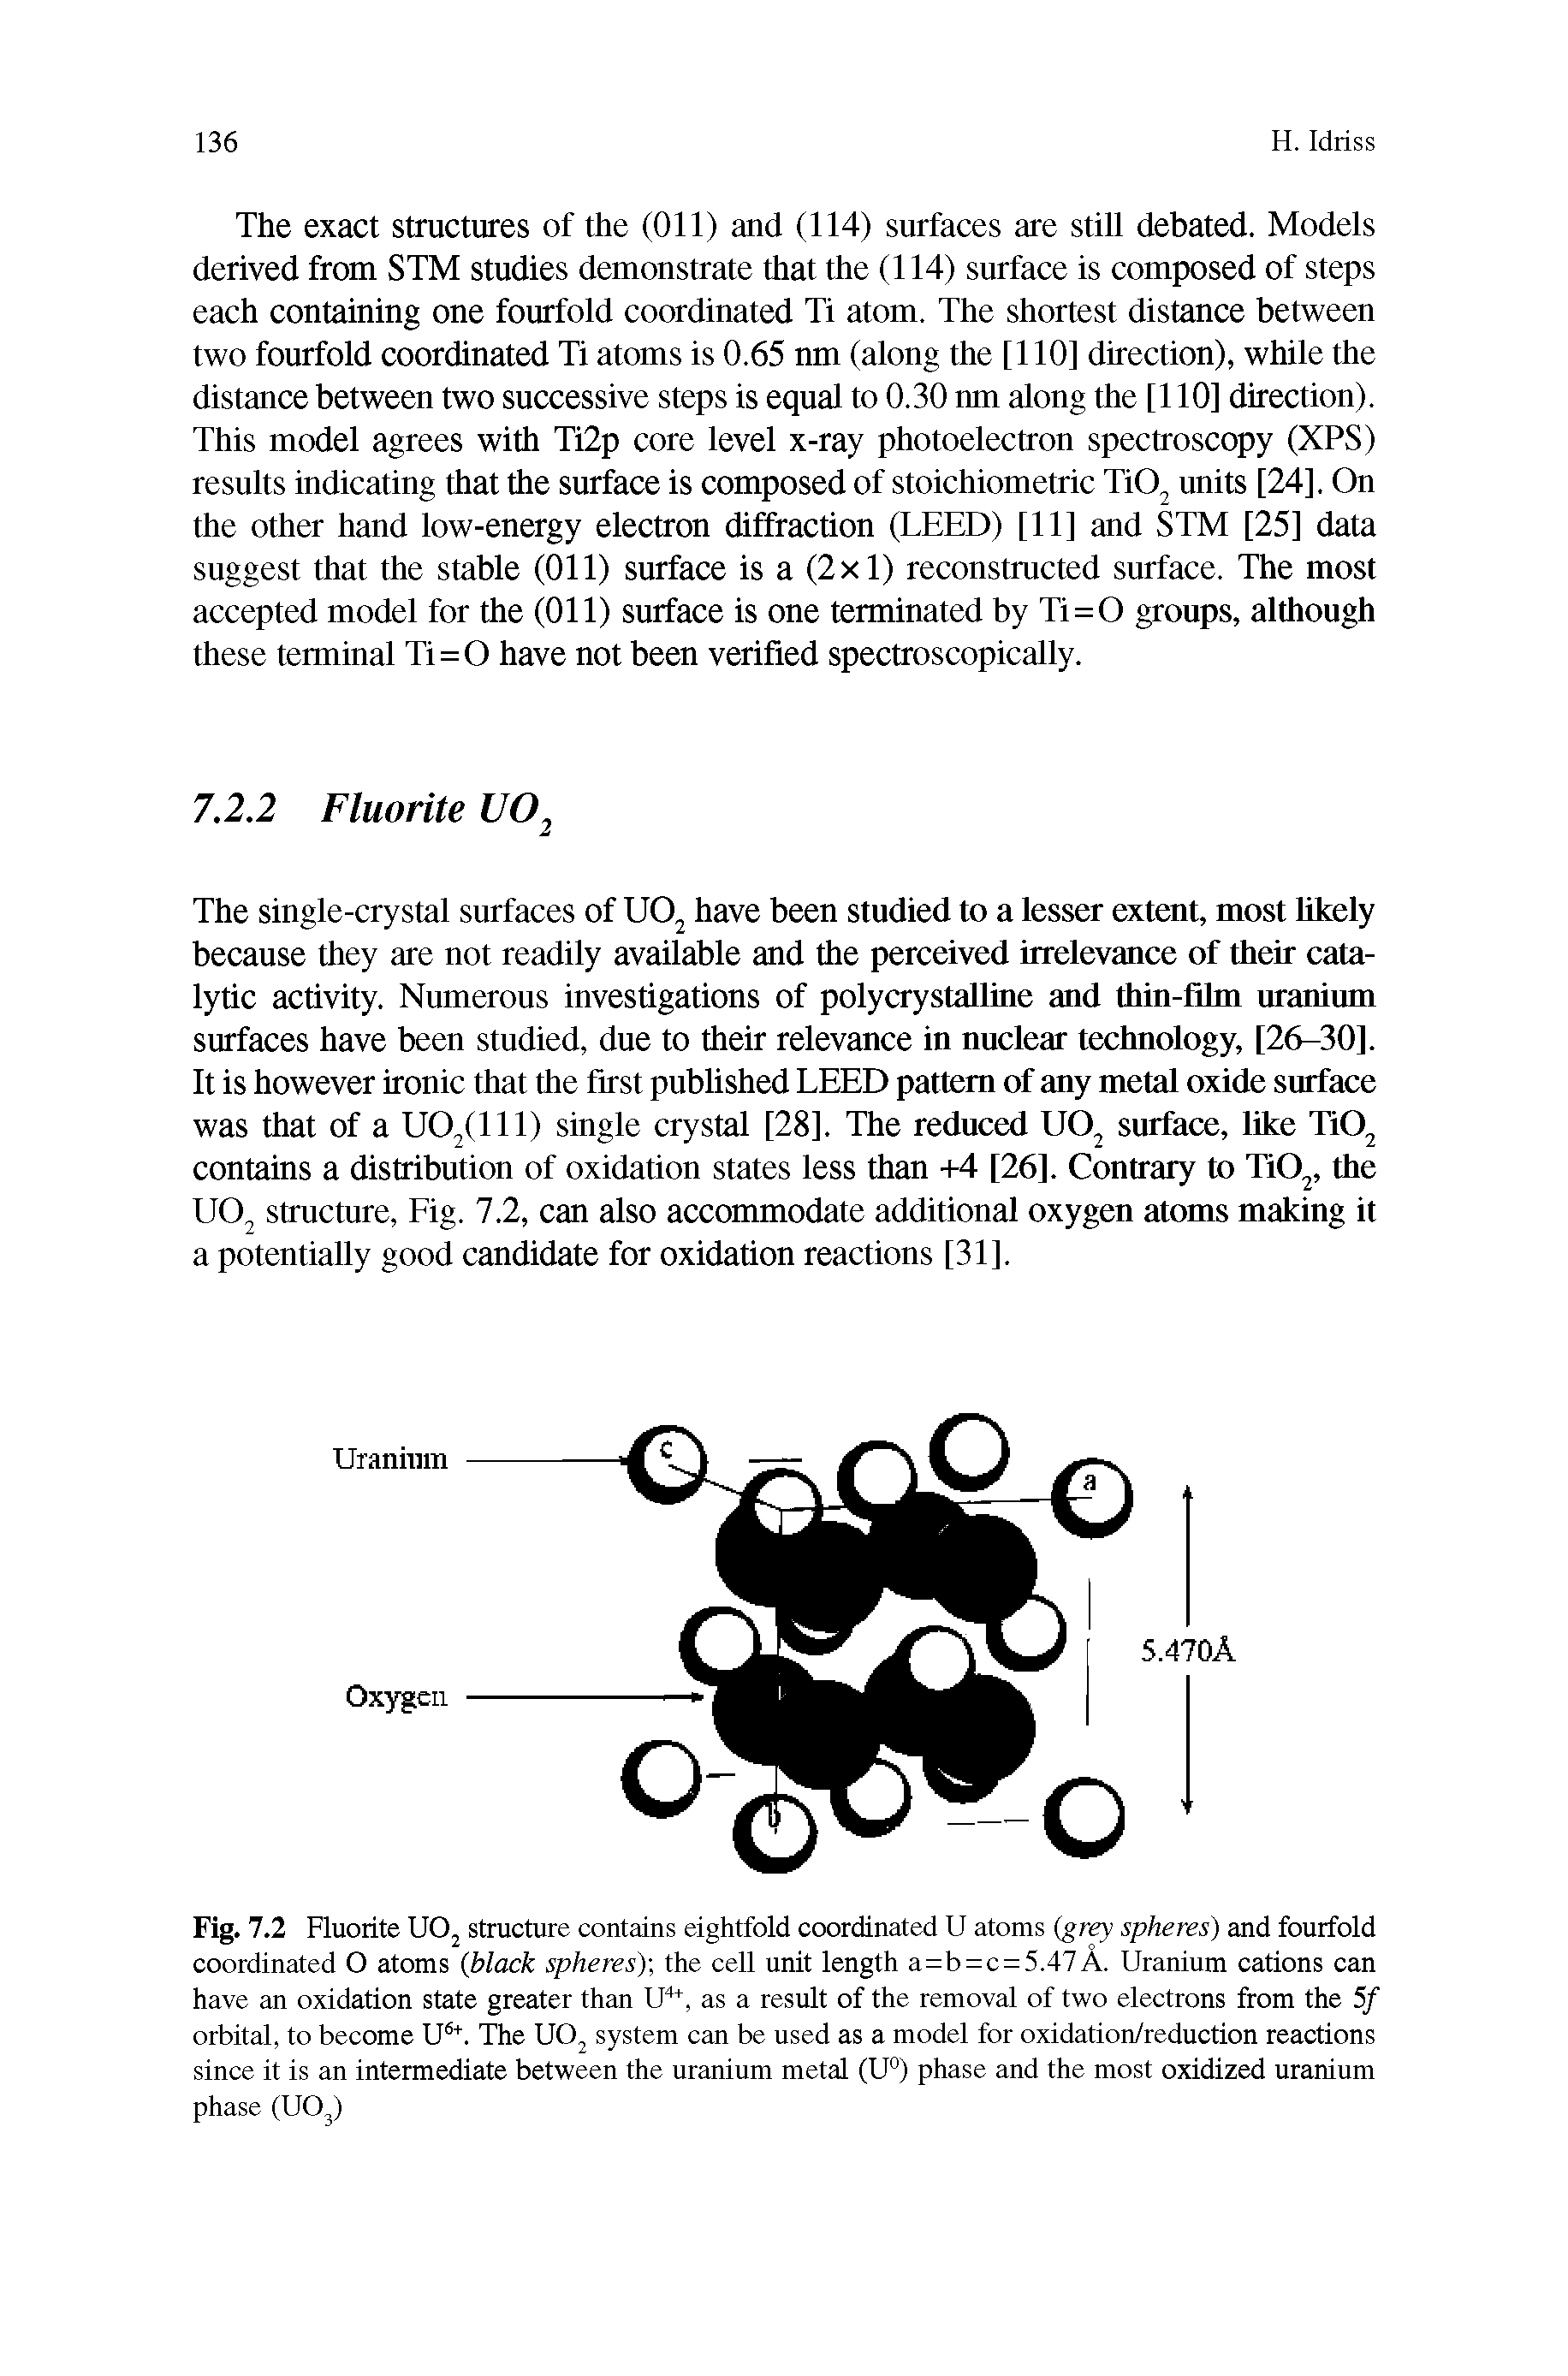 Fig. 7.2 Fluorite UOj structure contains eightfold coordinated U atoms (grey spheres) and fourfold coordinated O atoms (black spheres)-, the cell unit length a=b = c = 5.47A. Uranium cations can have an oxidation state greater than U +, as a result of the removal of two electrons from the 5/ orbital, to become The UO system can be used as a model for oxidation/reduction reactions since it is an intermediate between the uranium metal (U ) phase and the most oxidized uranium phase (UO )...